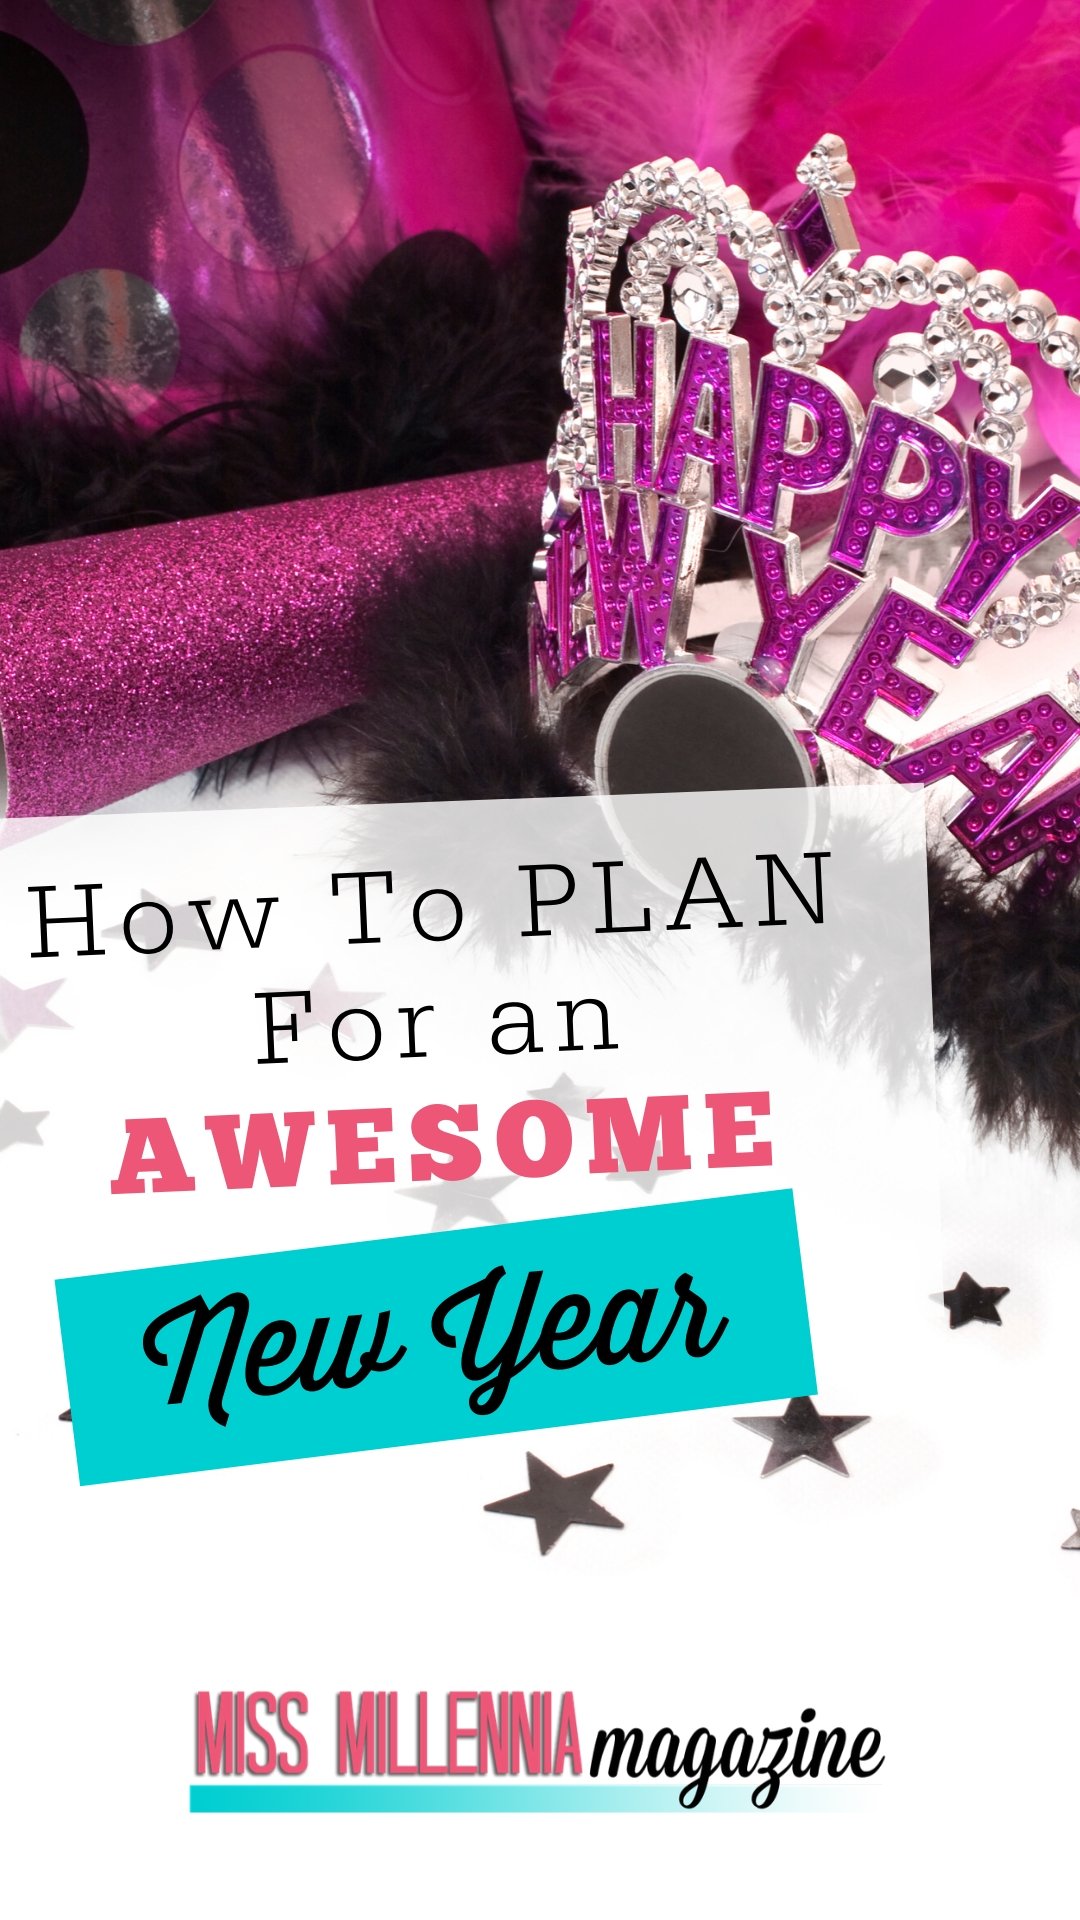 How To Plan For an Awesome New Year